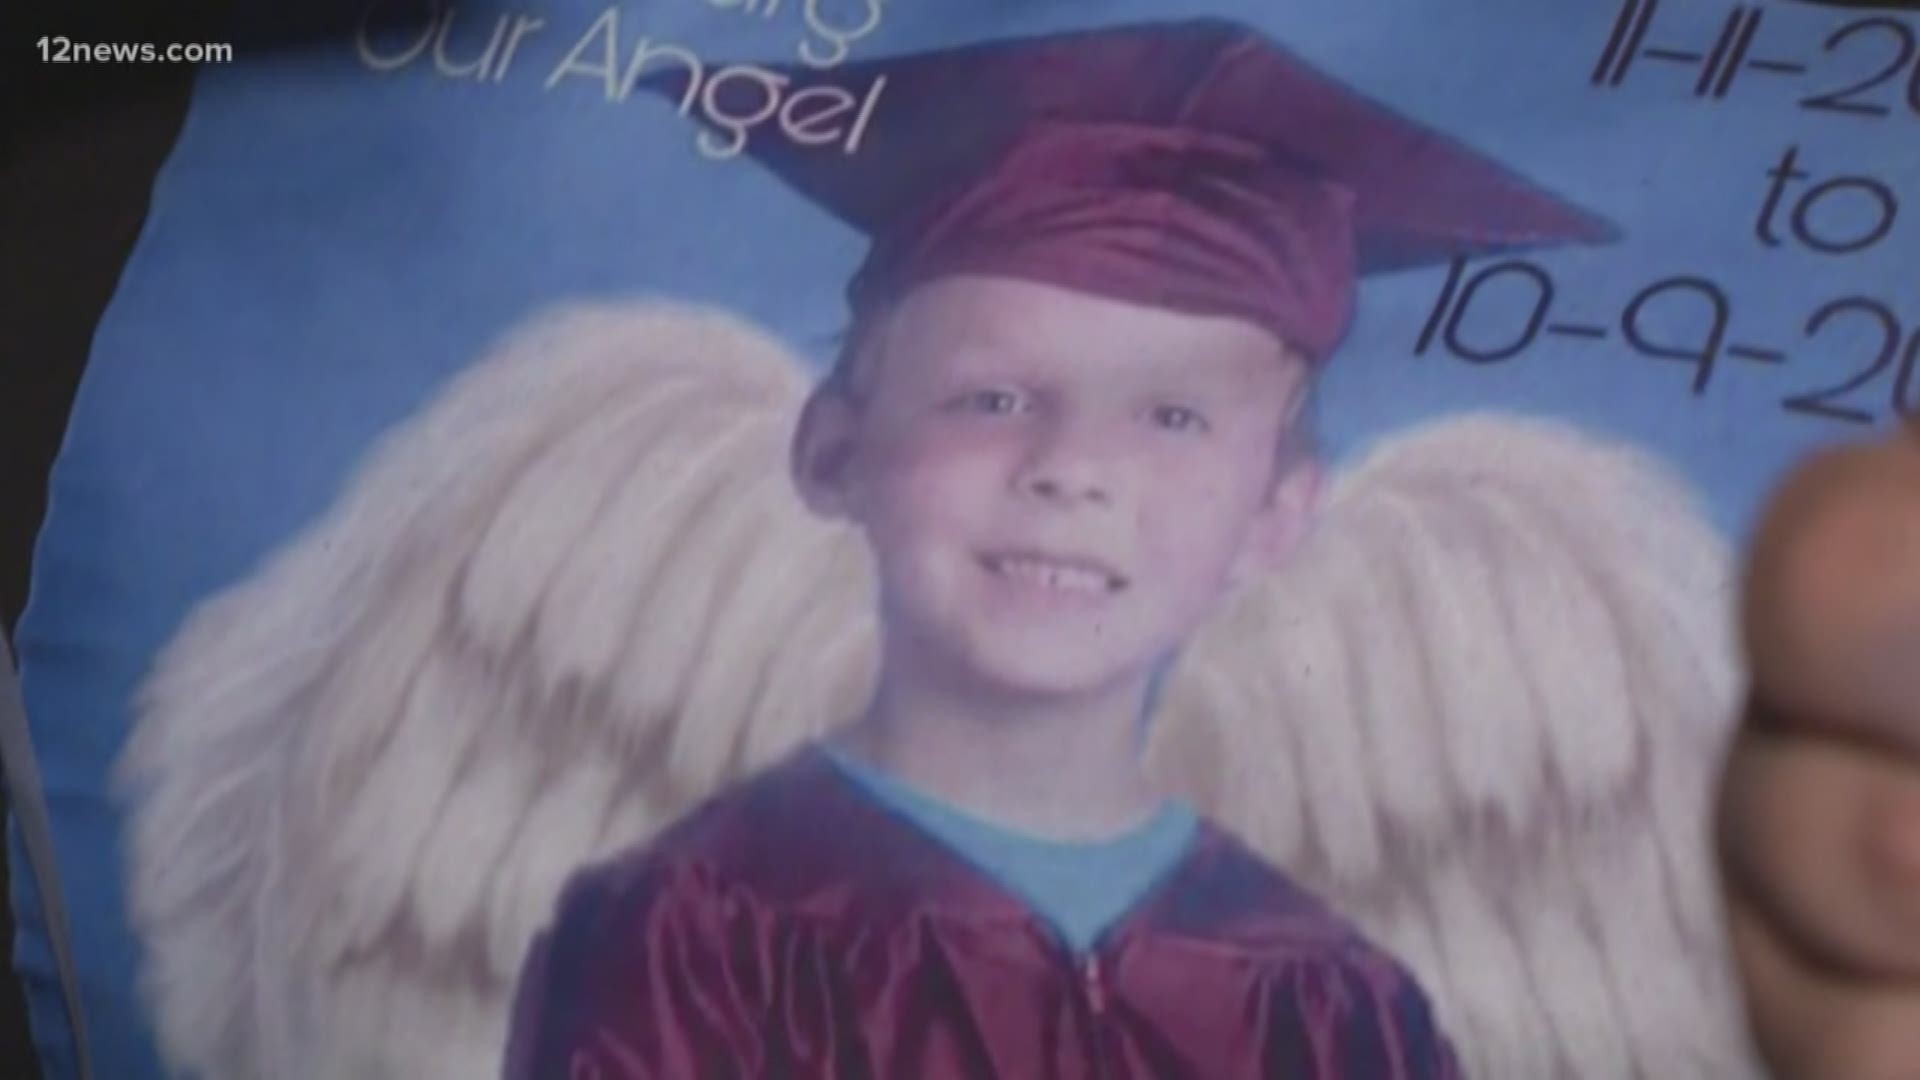 Loved ones remembered the life of a 6-year-old boy who was killed after he was hit by a car while he was crossing the street.